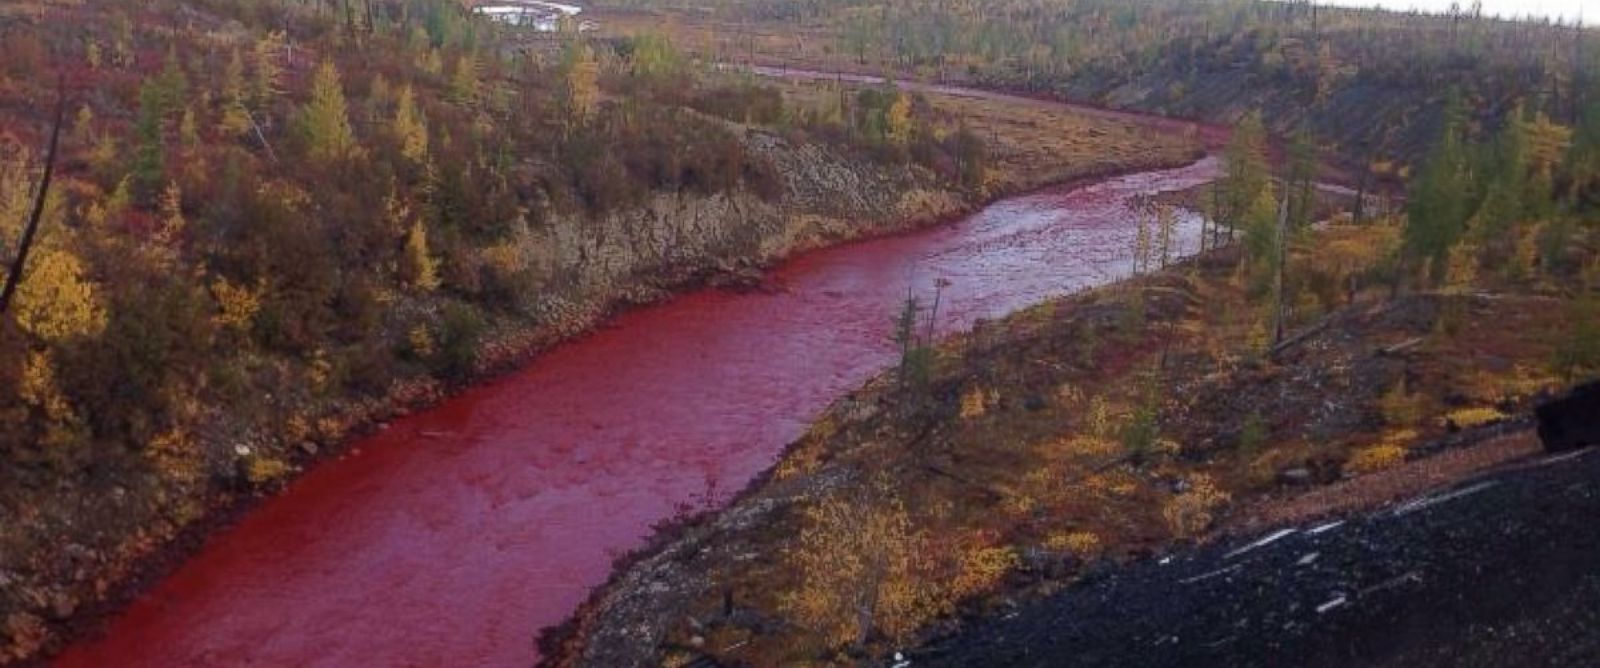 Russian River Mysteriously Turns Blood Red ABC News